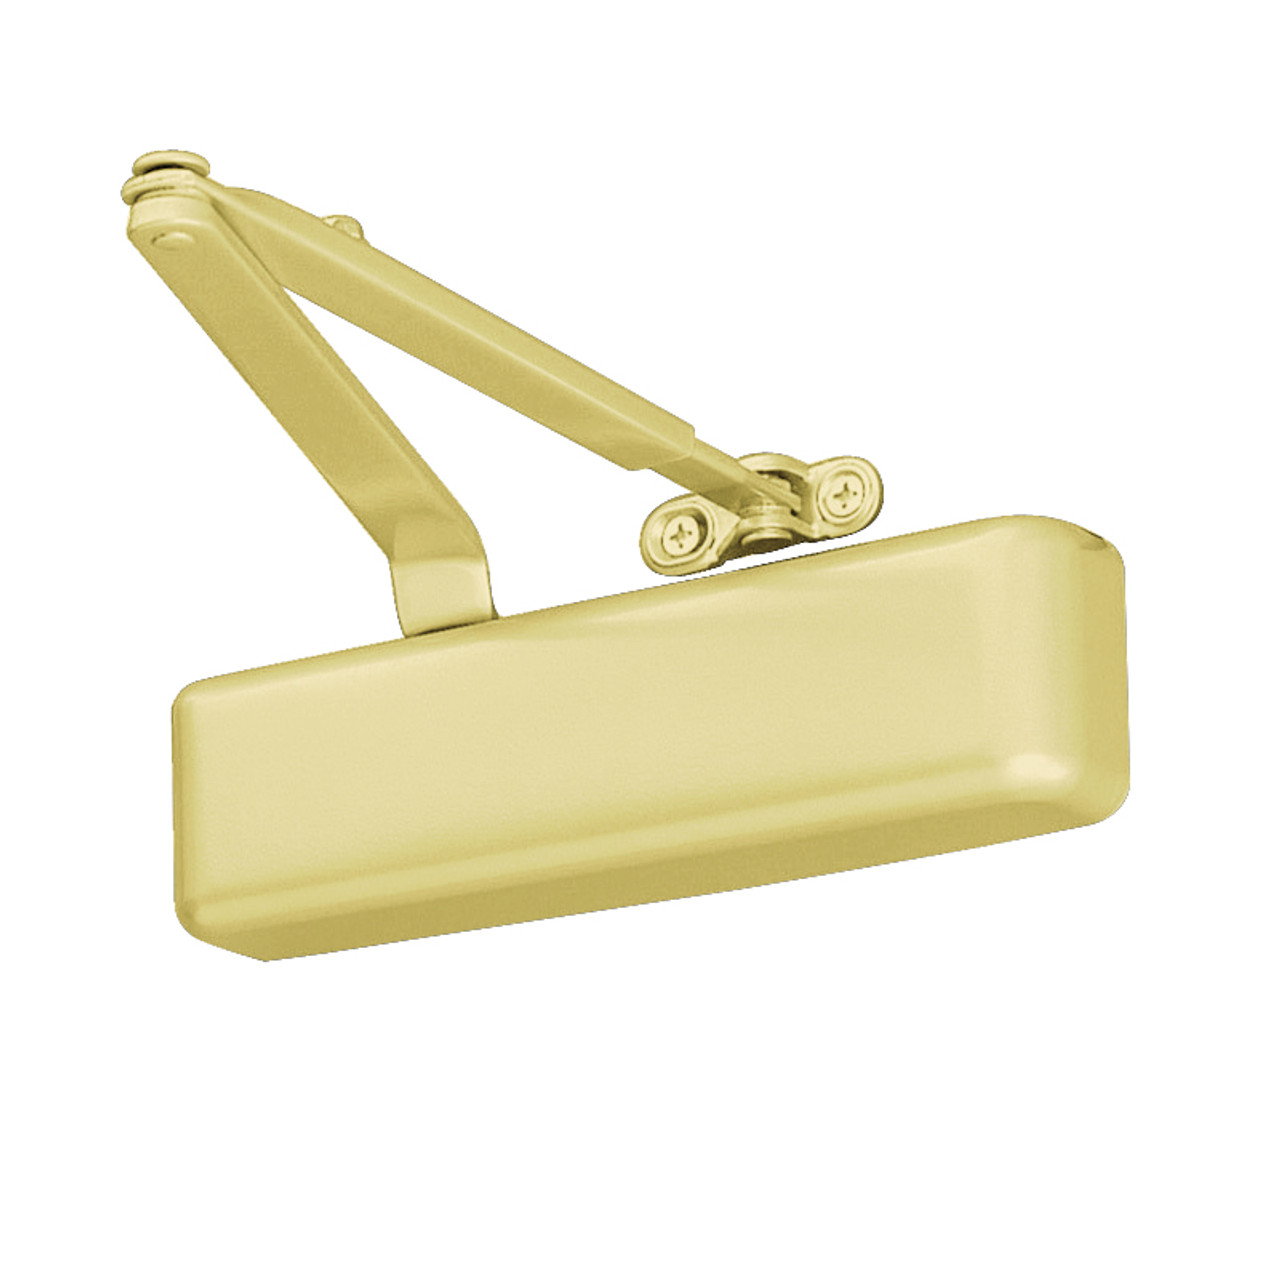 4031-LONG-US3 LCN Door Closer with Long Arm in Bright Brass Finish